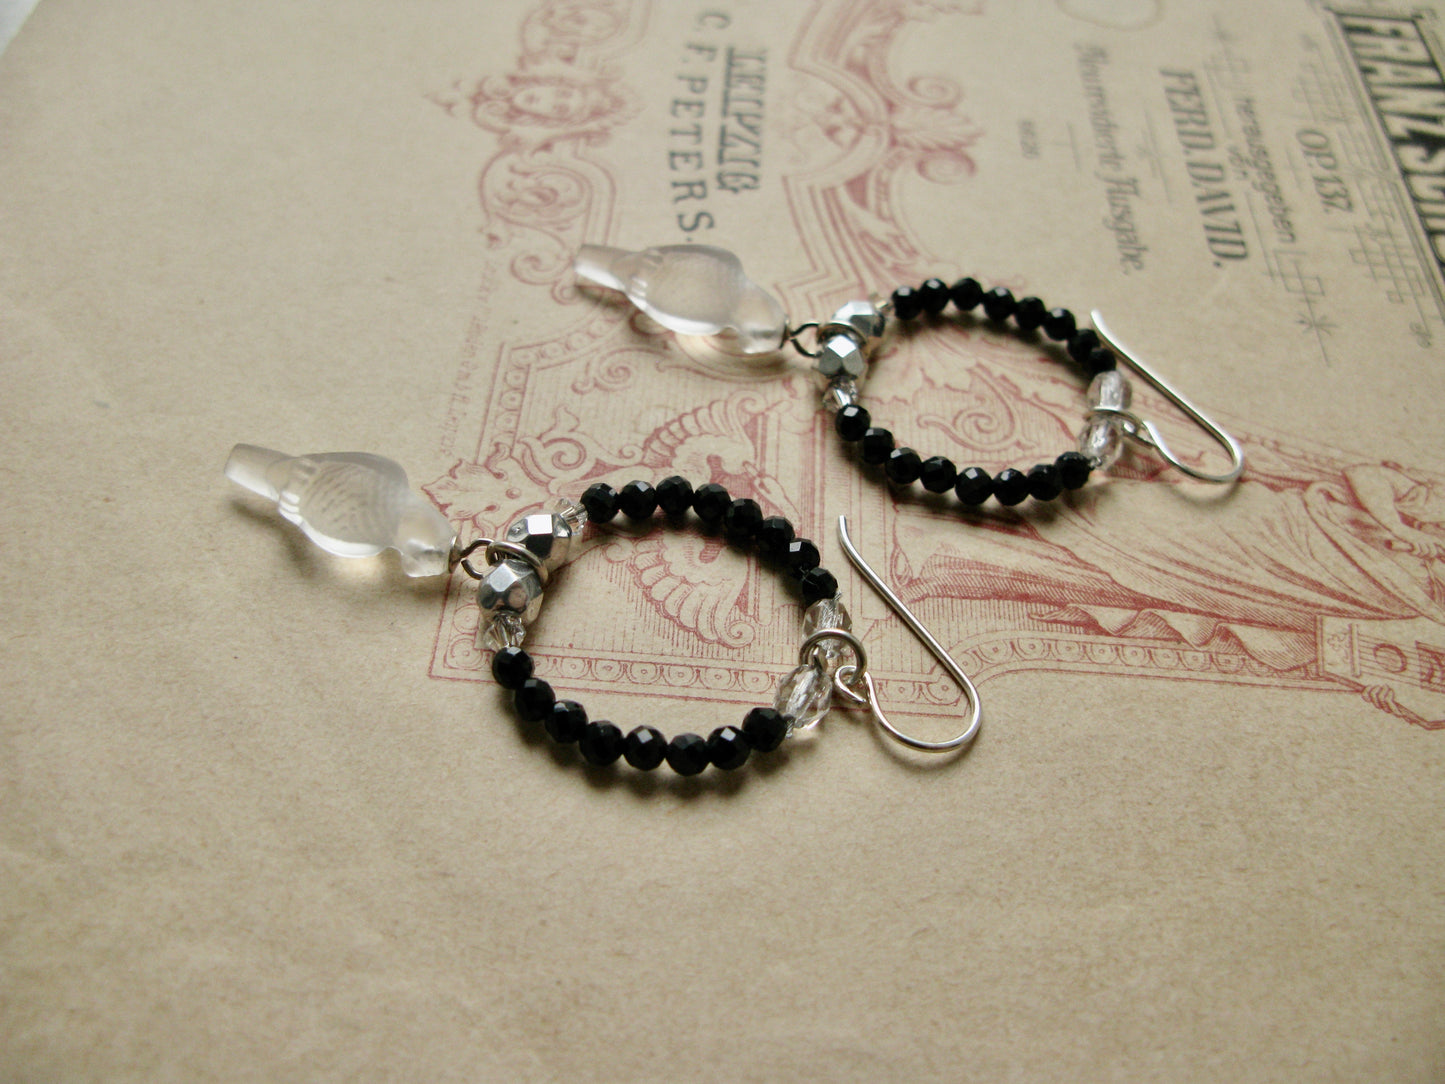 Liberté earrings with black agate